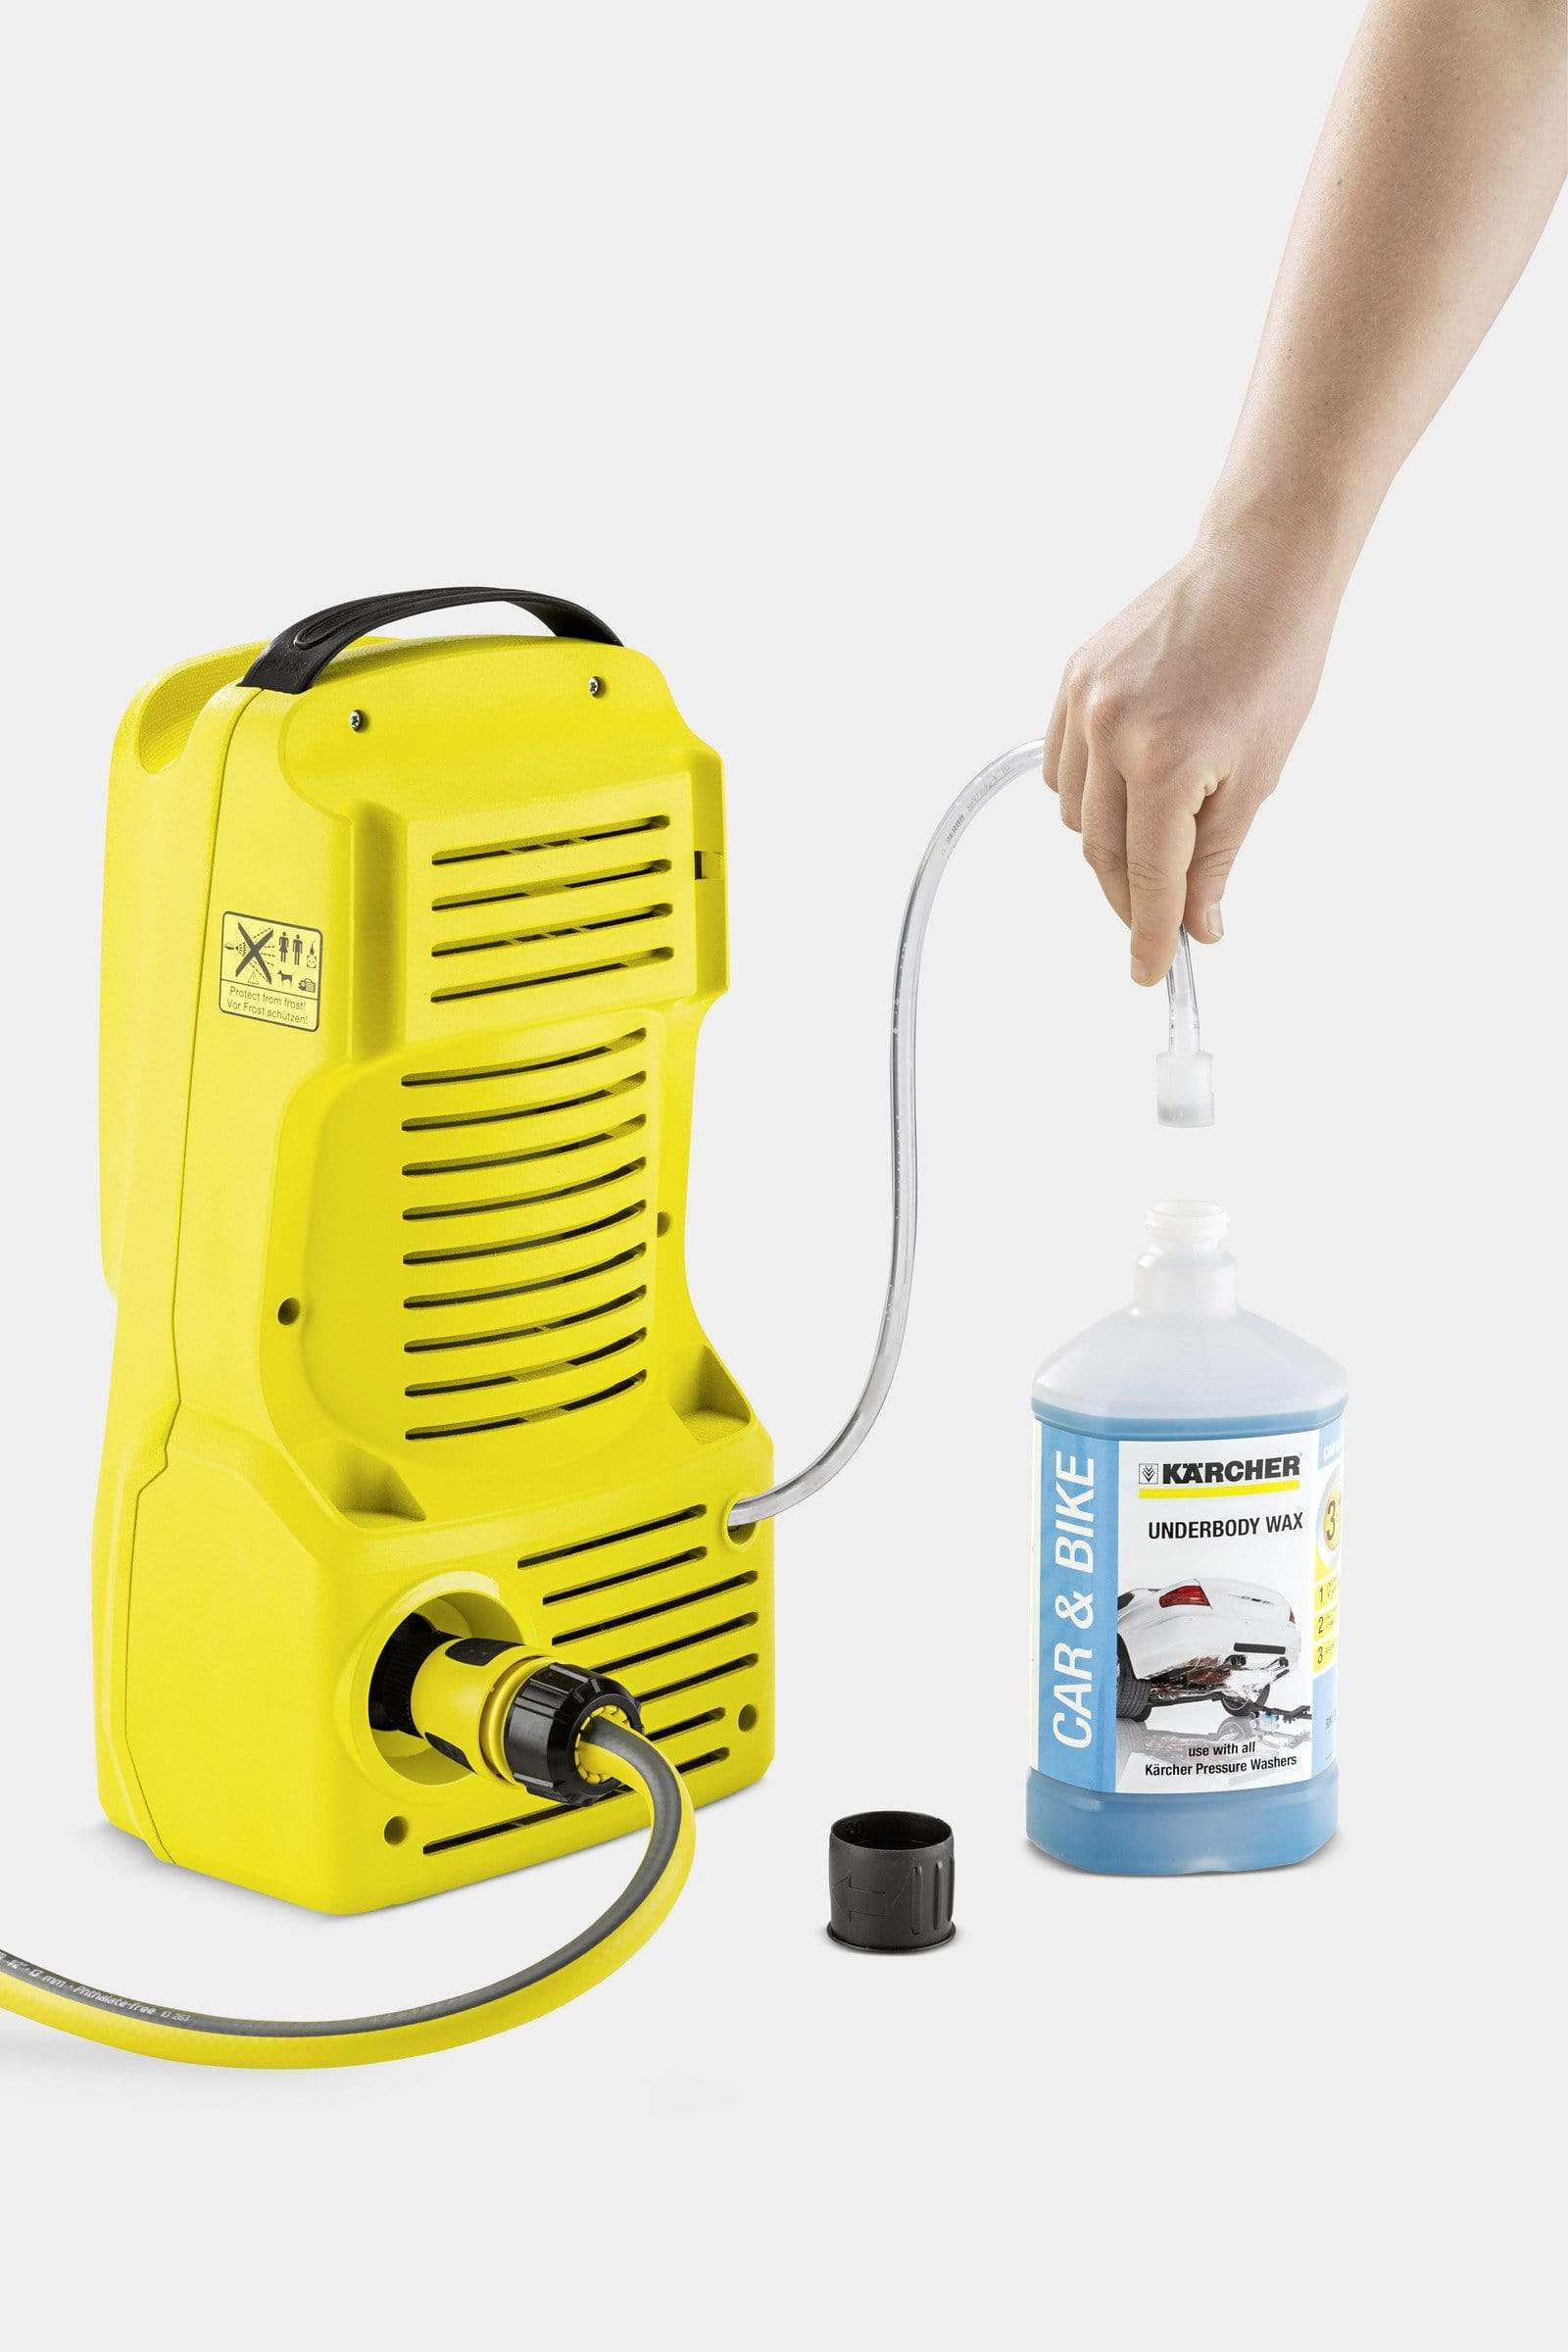 Karcher Electric K2 Compact Car & Home High Pressure Washer 110 Bar | Supply Master | Accra, Ghana Tools Building Steel Engineering Hardware tool